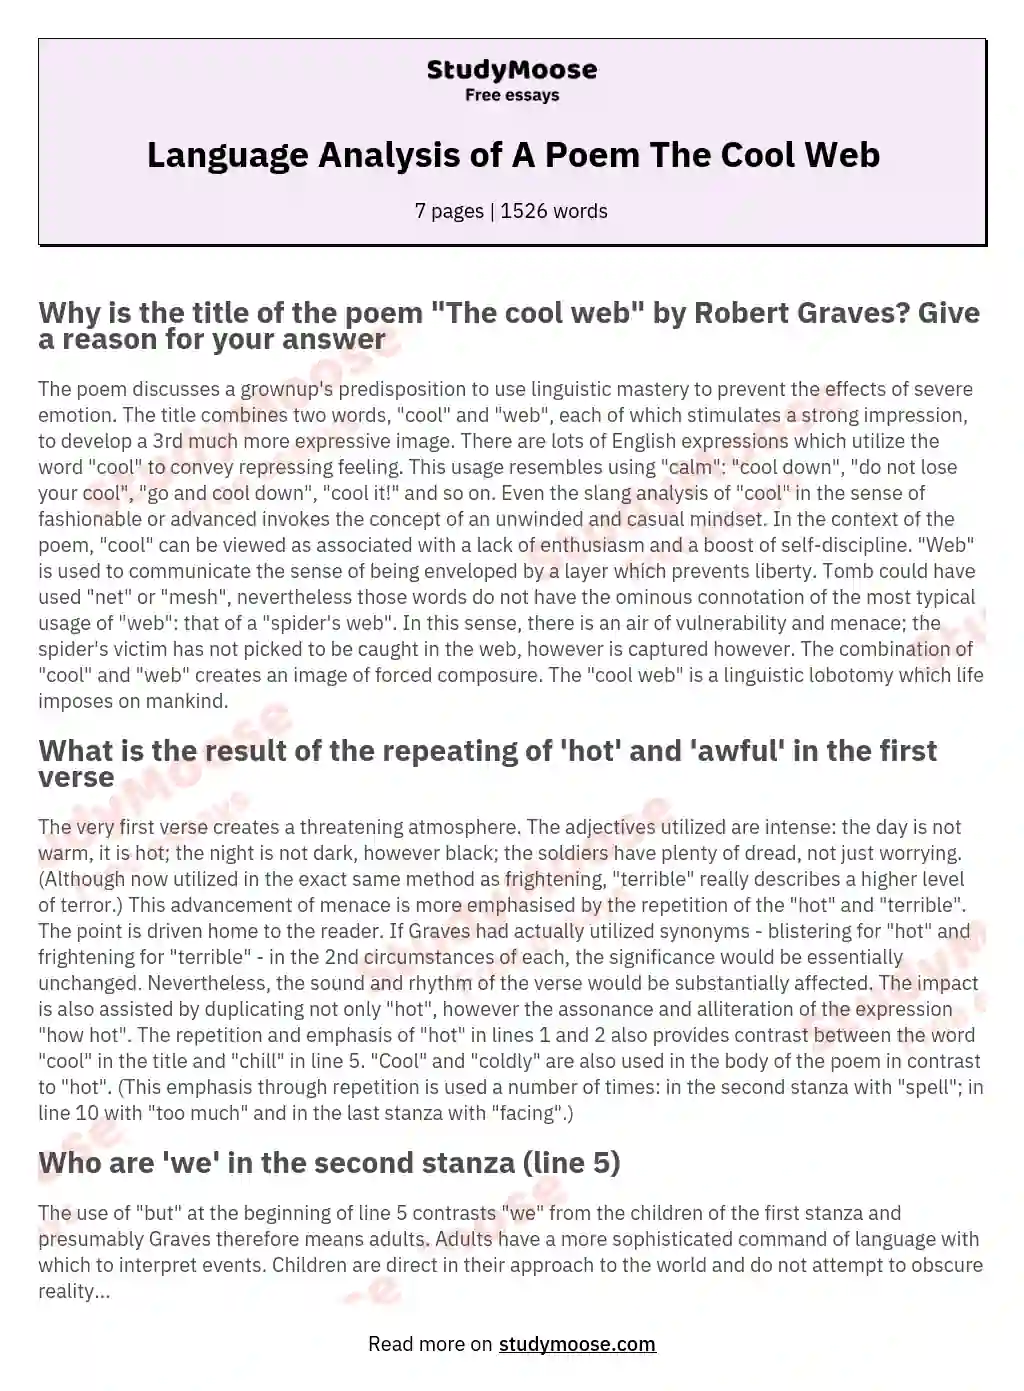 Language Analysis of A Poem The Cool Web essay